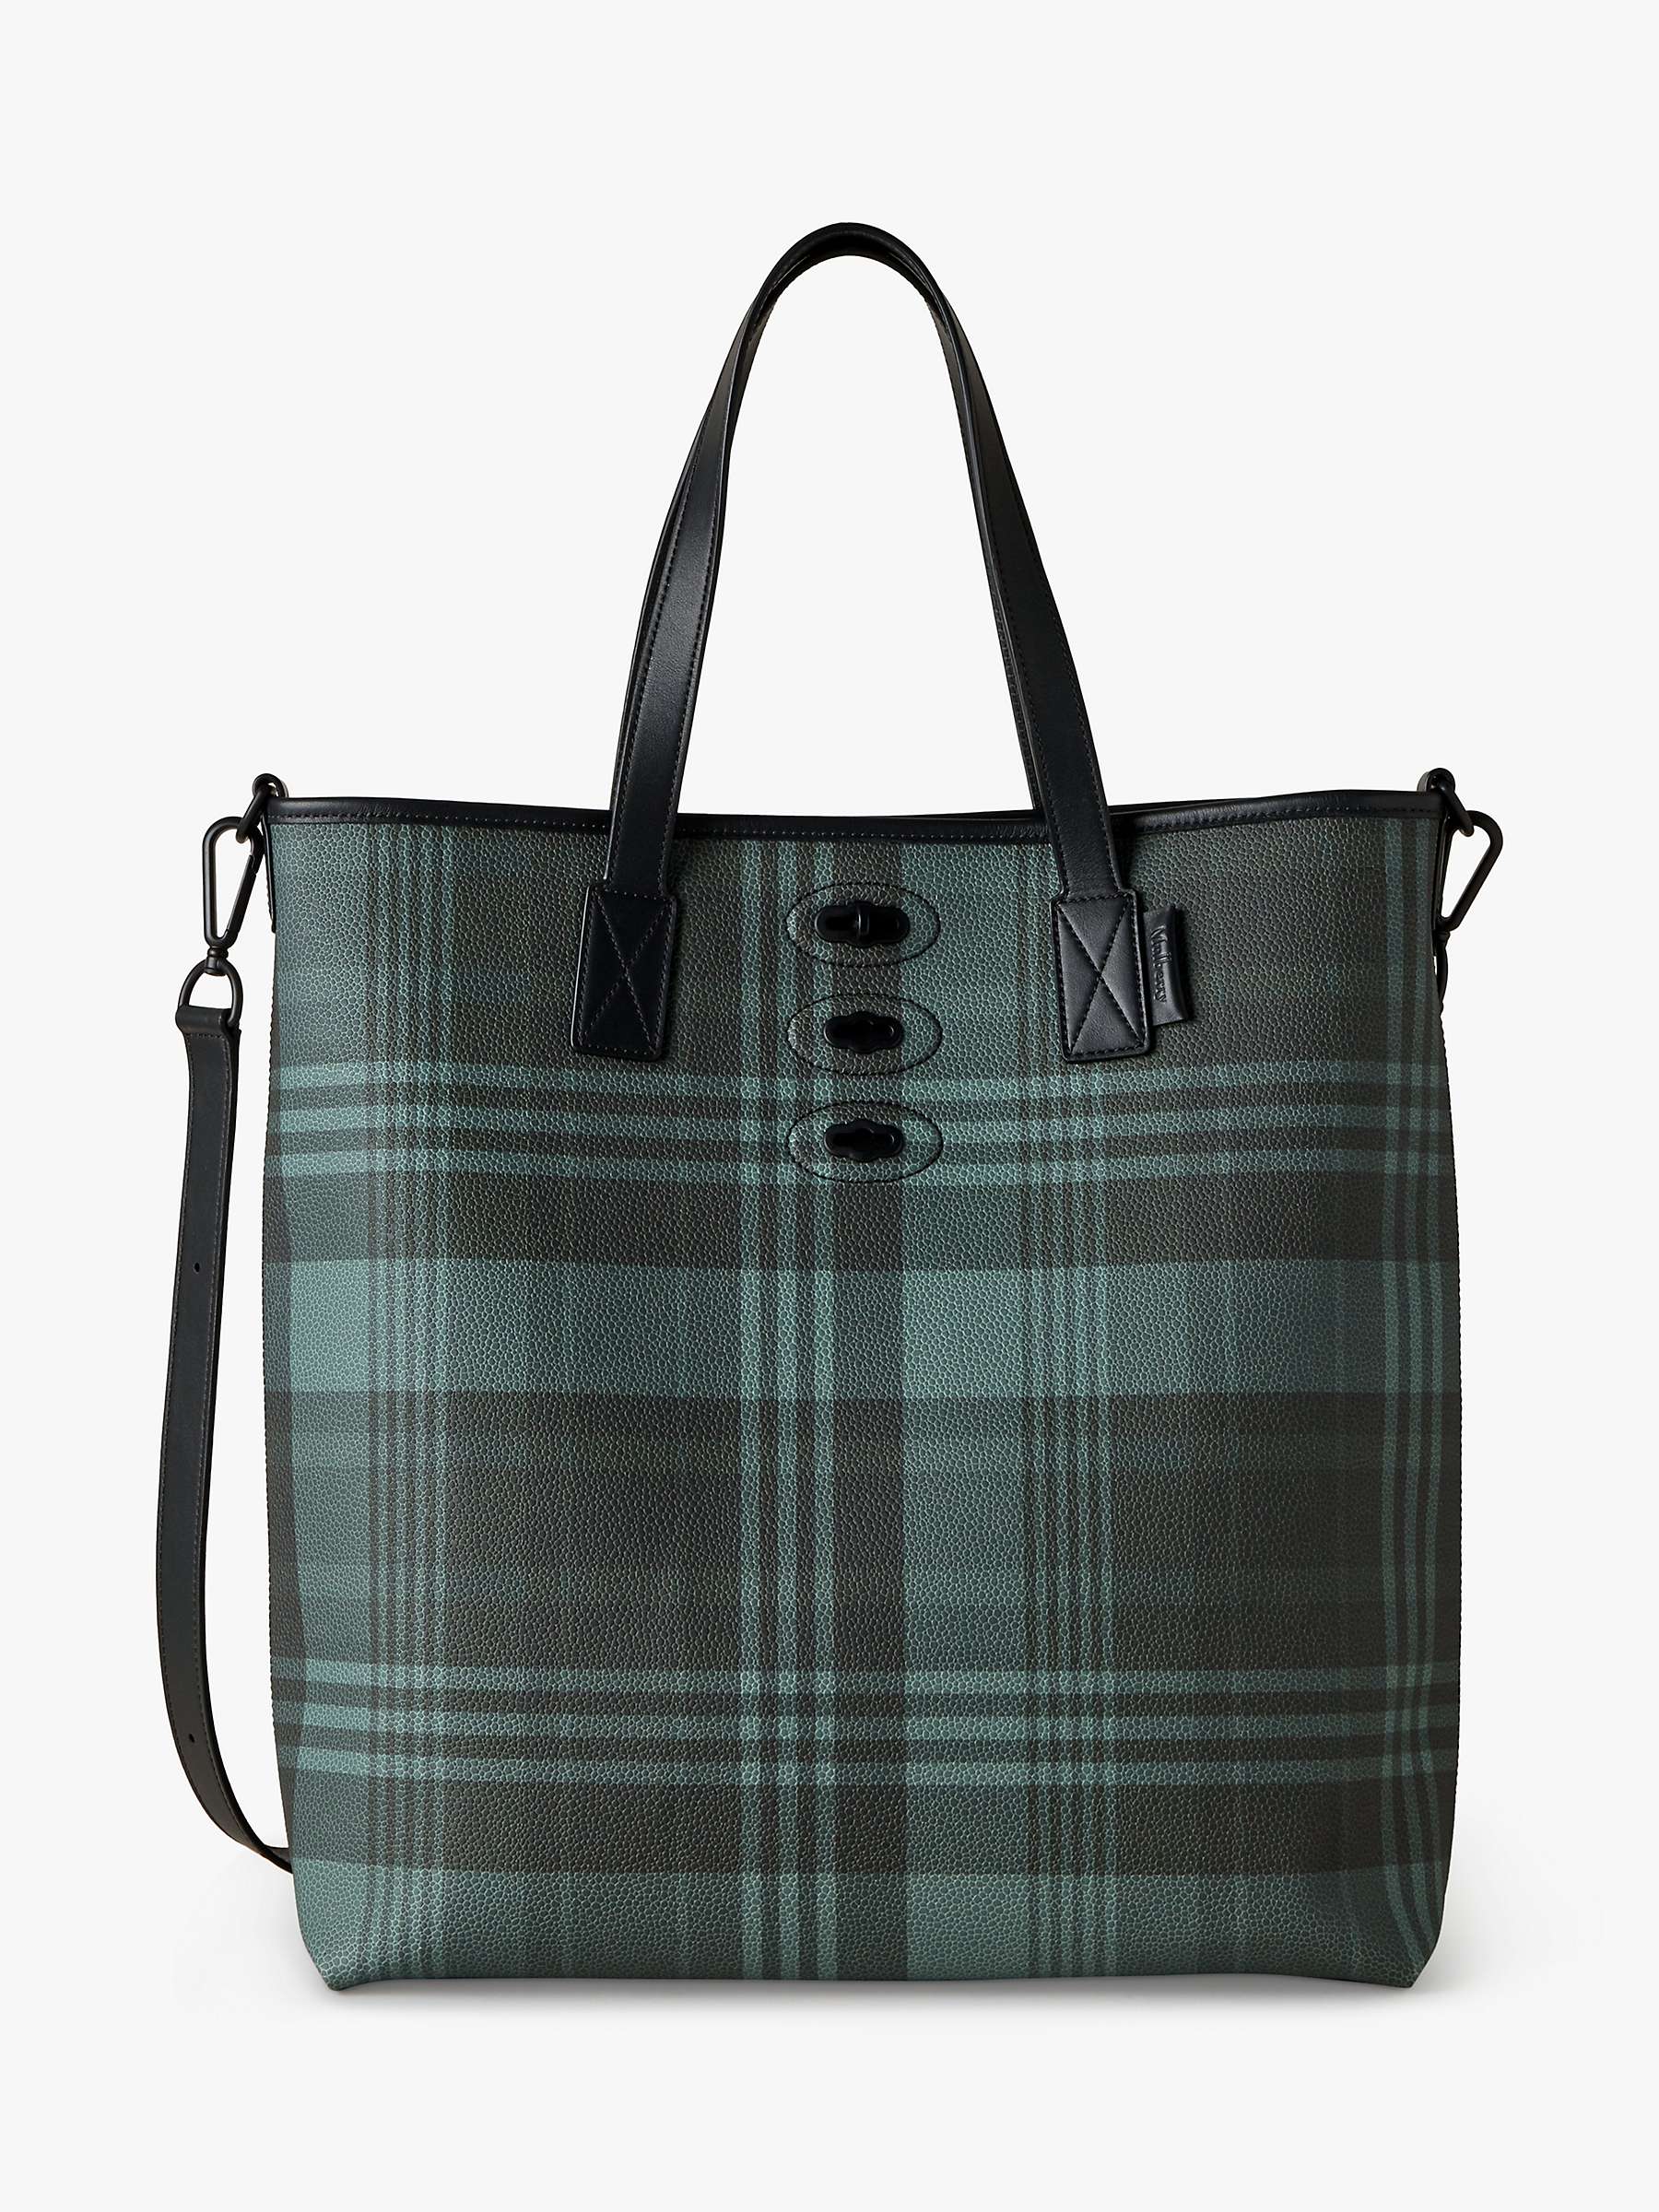 Buy Mulberry Bryn Printed Eco Scotchgrain & Flat Calf Leather Tote Bag, Mulberry Green Online at johnlewis.com